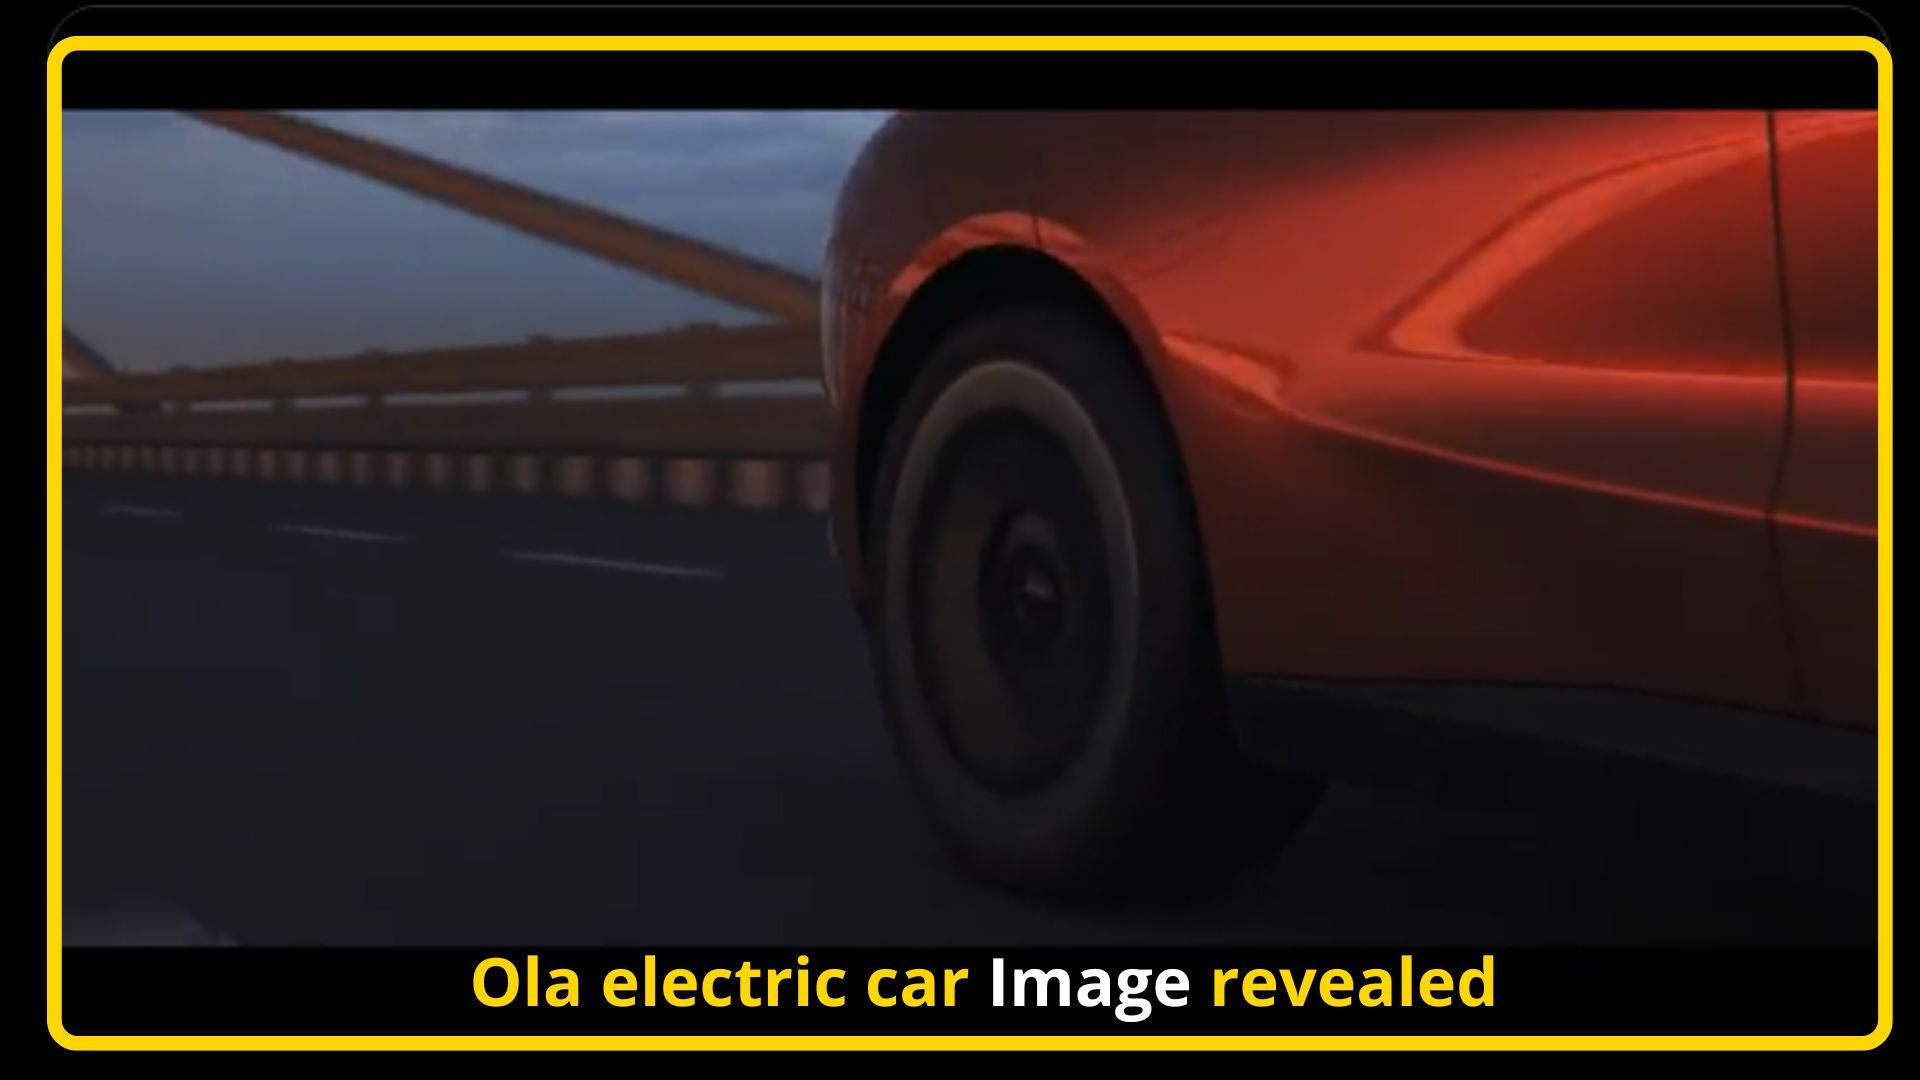 https://e-vehicleinfo.com/ola-electric-car-image-revealed-set-to-debut-on-august-15/